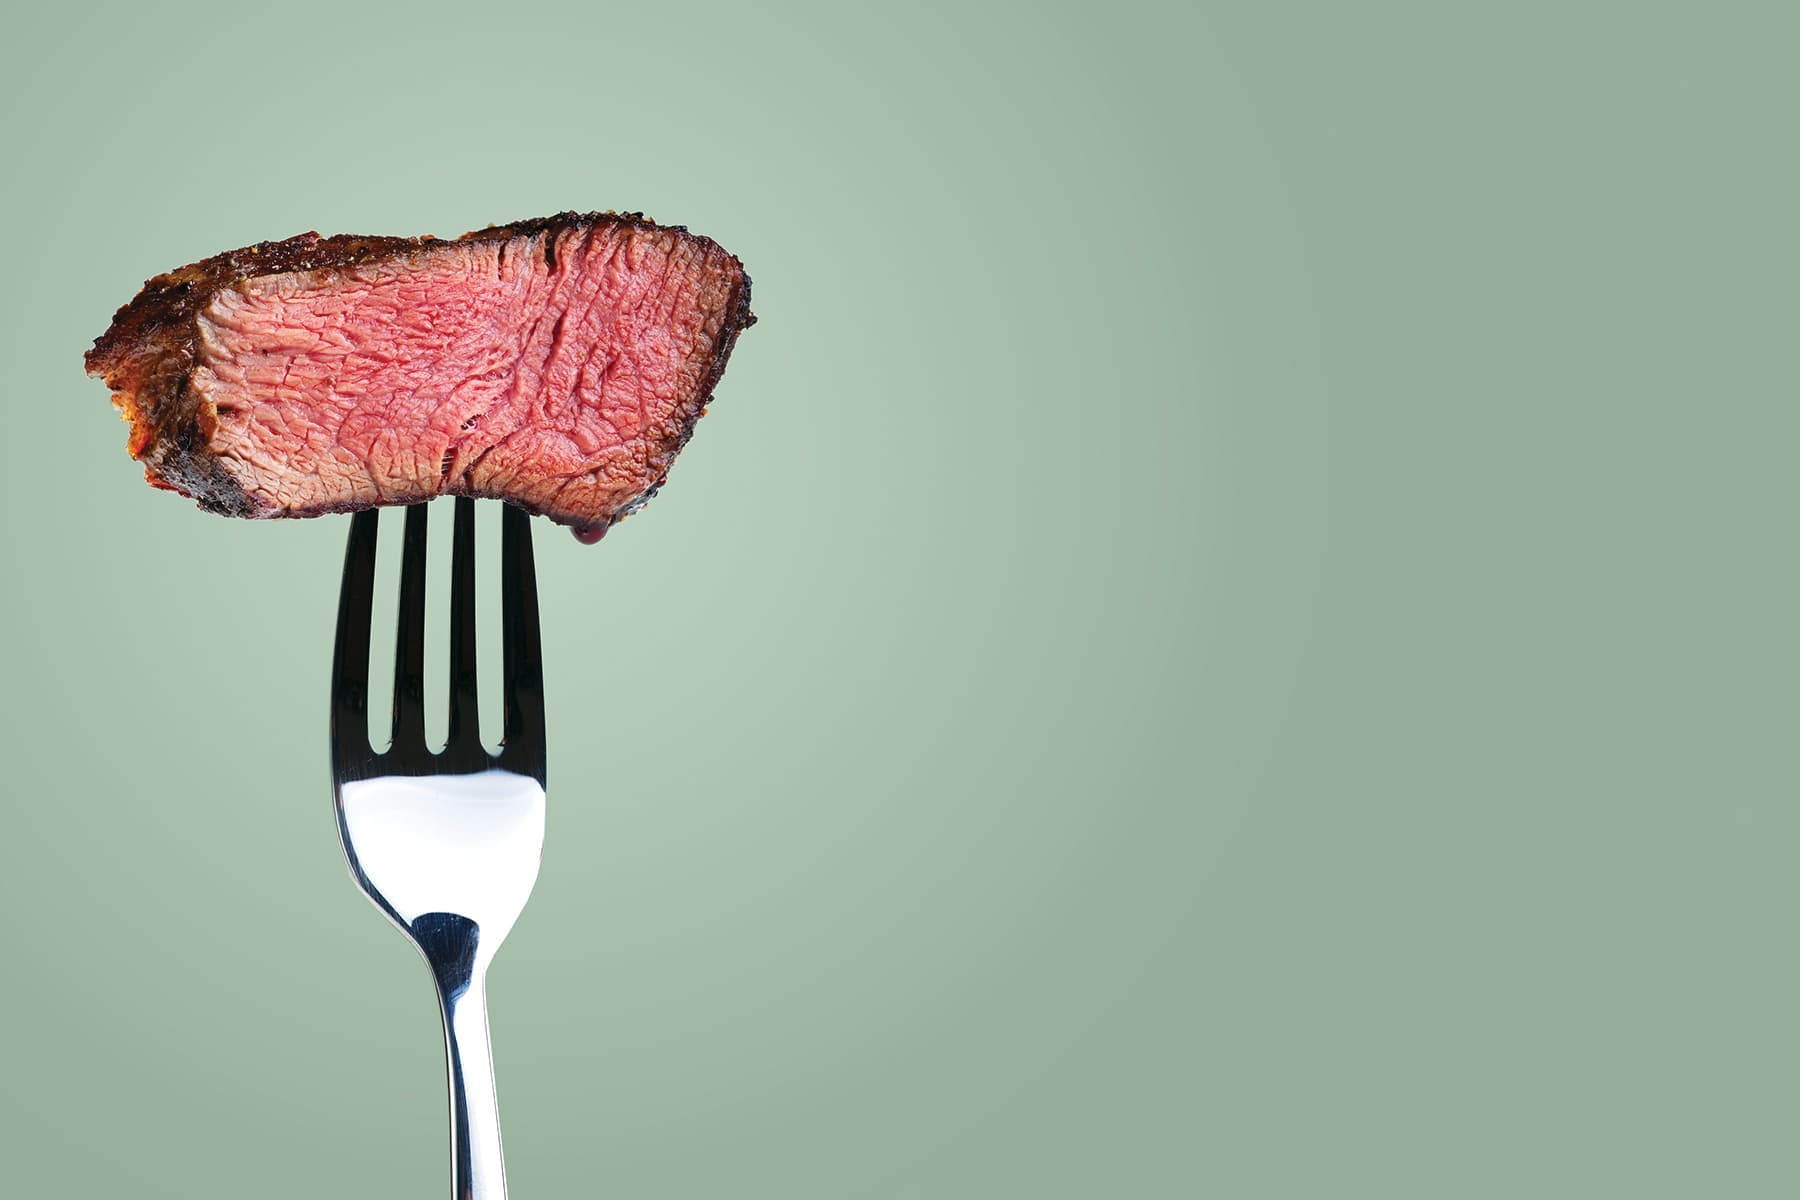 Will Real Meat Grown in a Lab Be Good for Us?